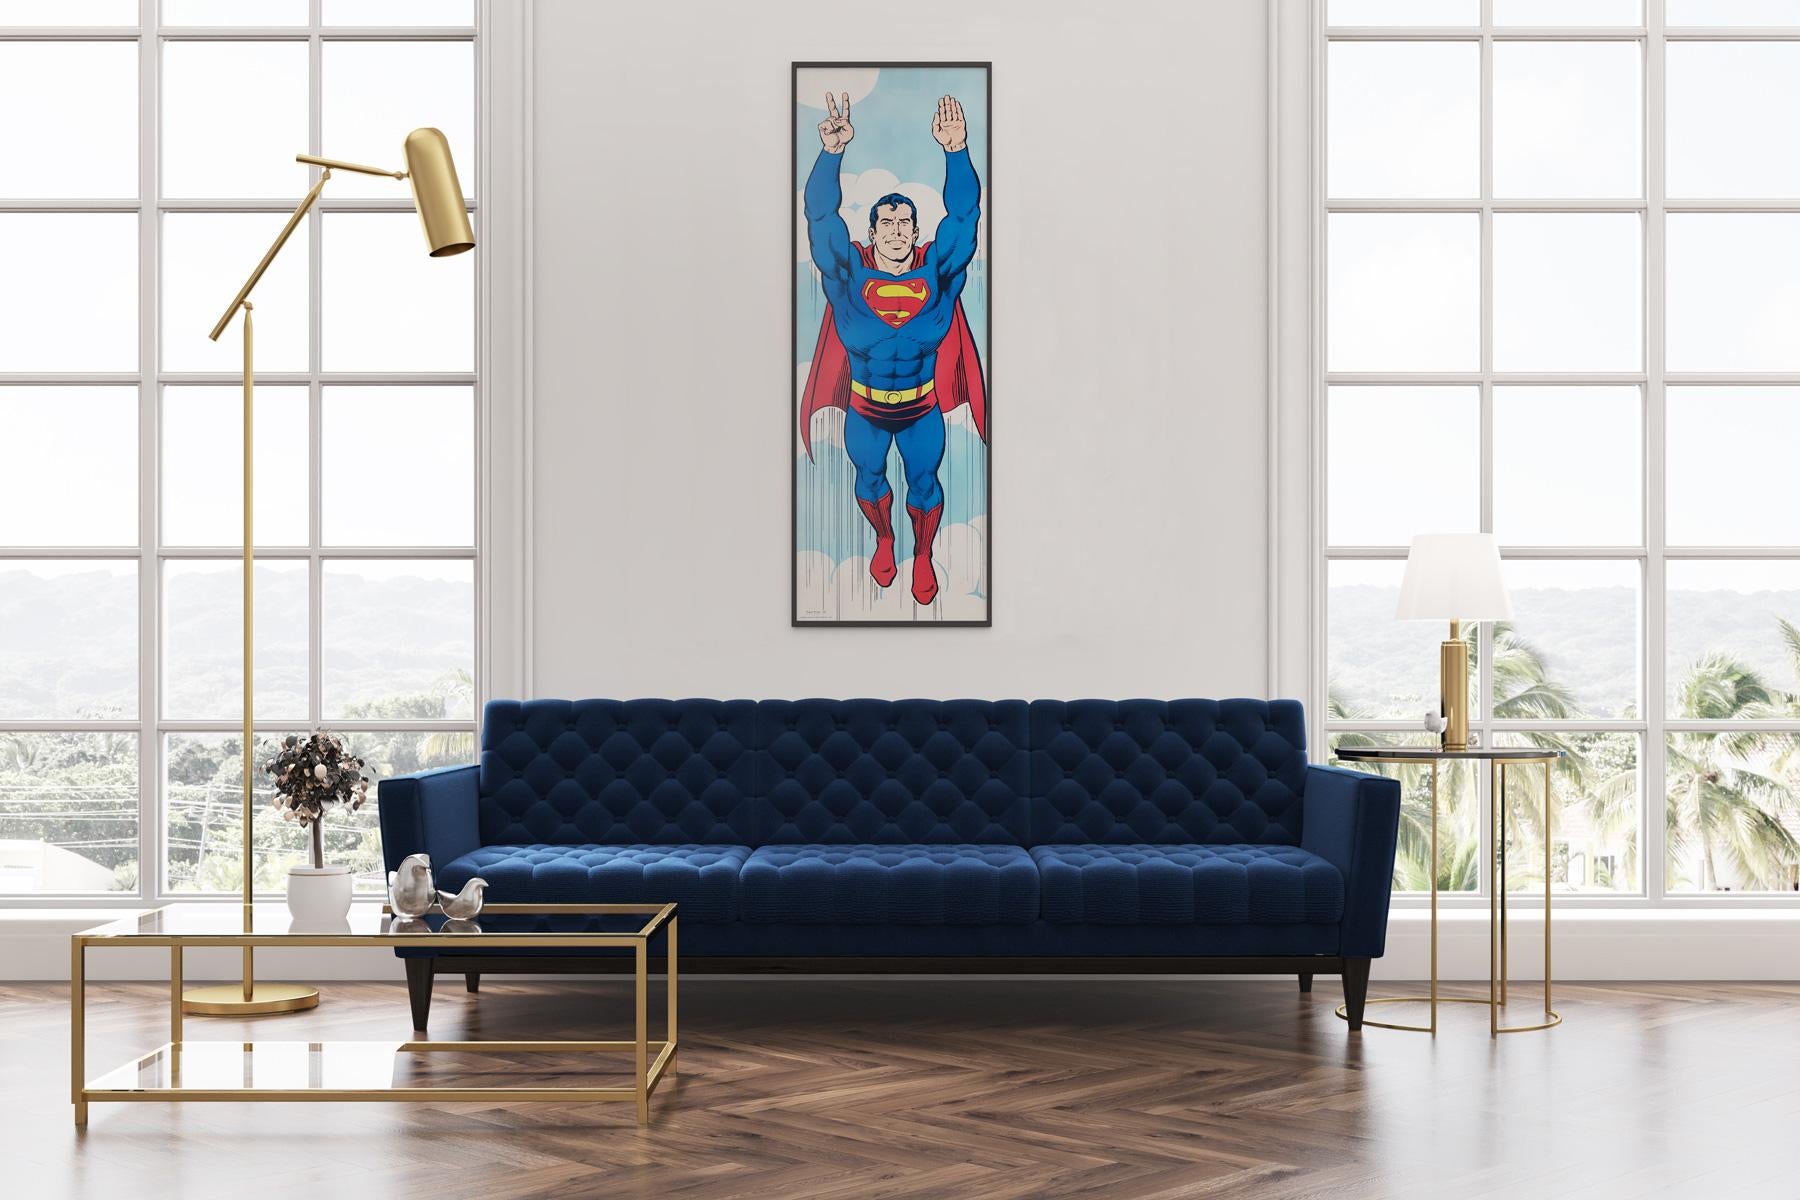 A super cool, super huge, super rare vintage 1971 Superman poster!

Fantastic original authorised commercial Superman Peace poster designed by Swan and Anderson and printed by Poster Prints. These posters were only printed originally in limited